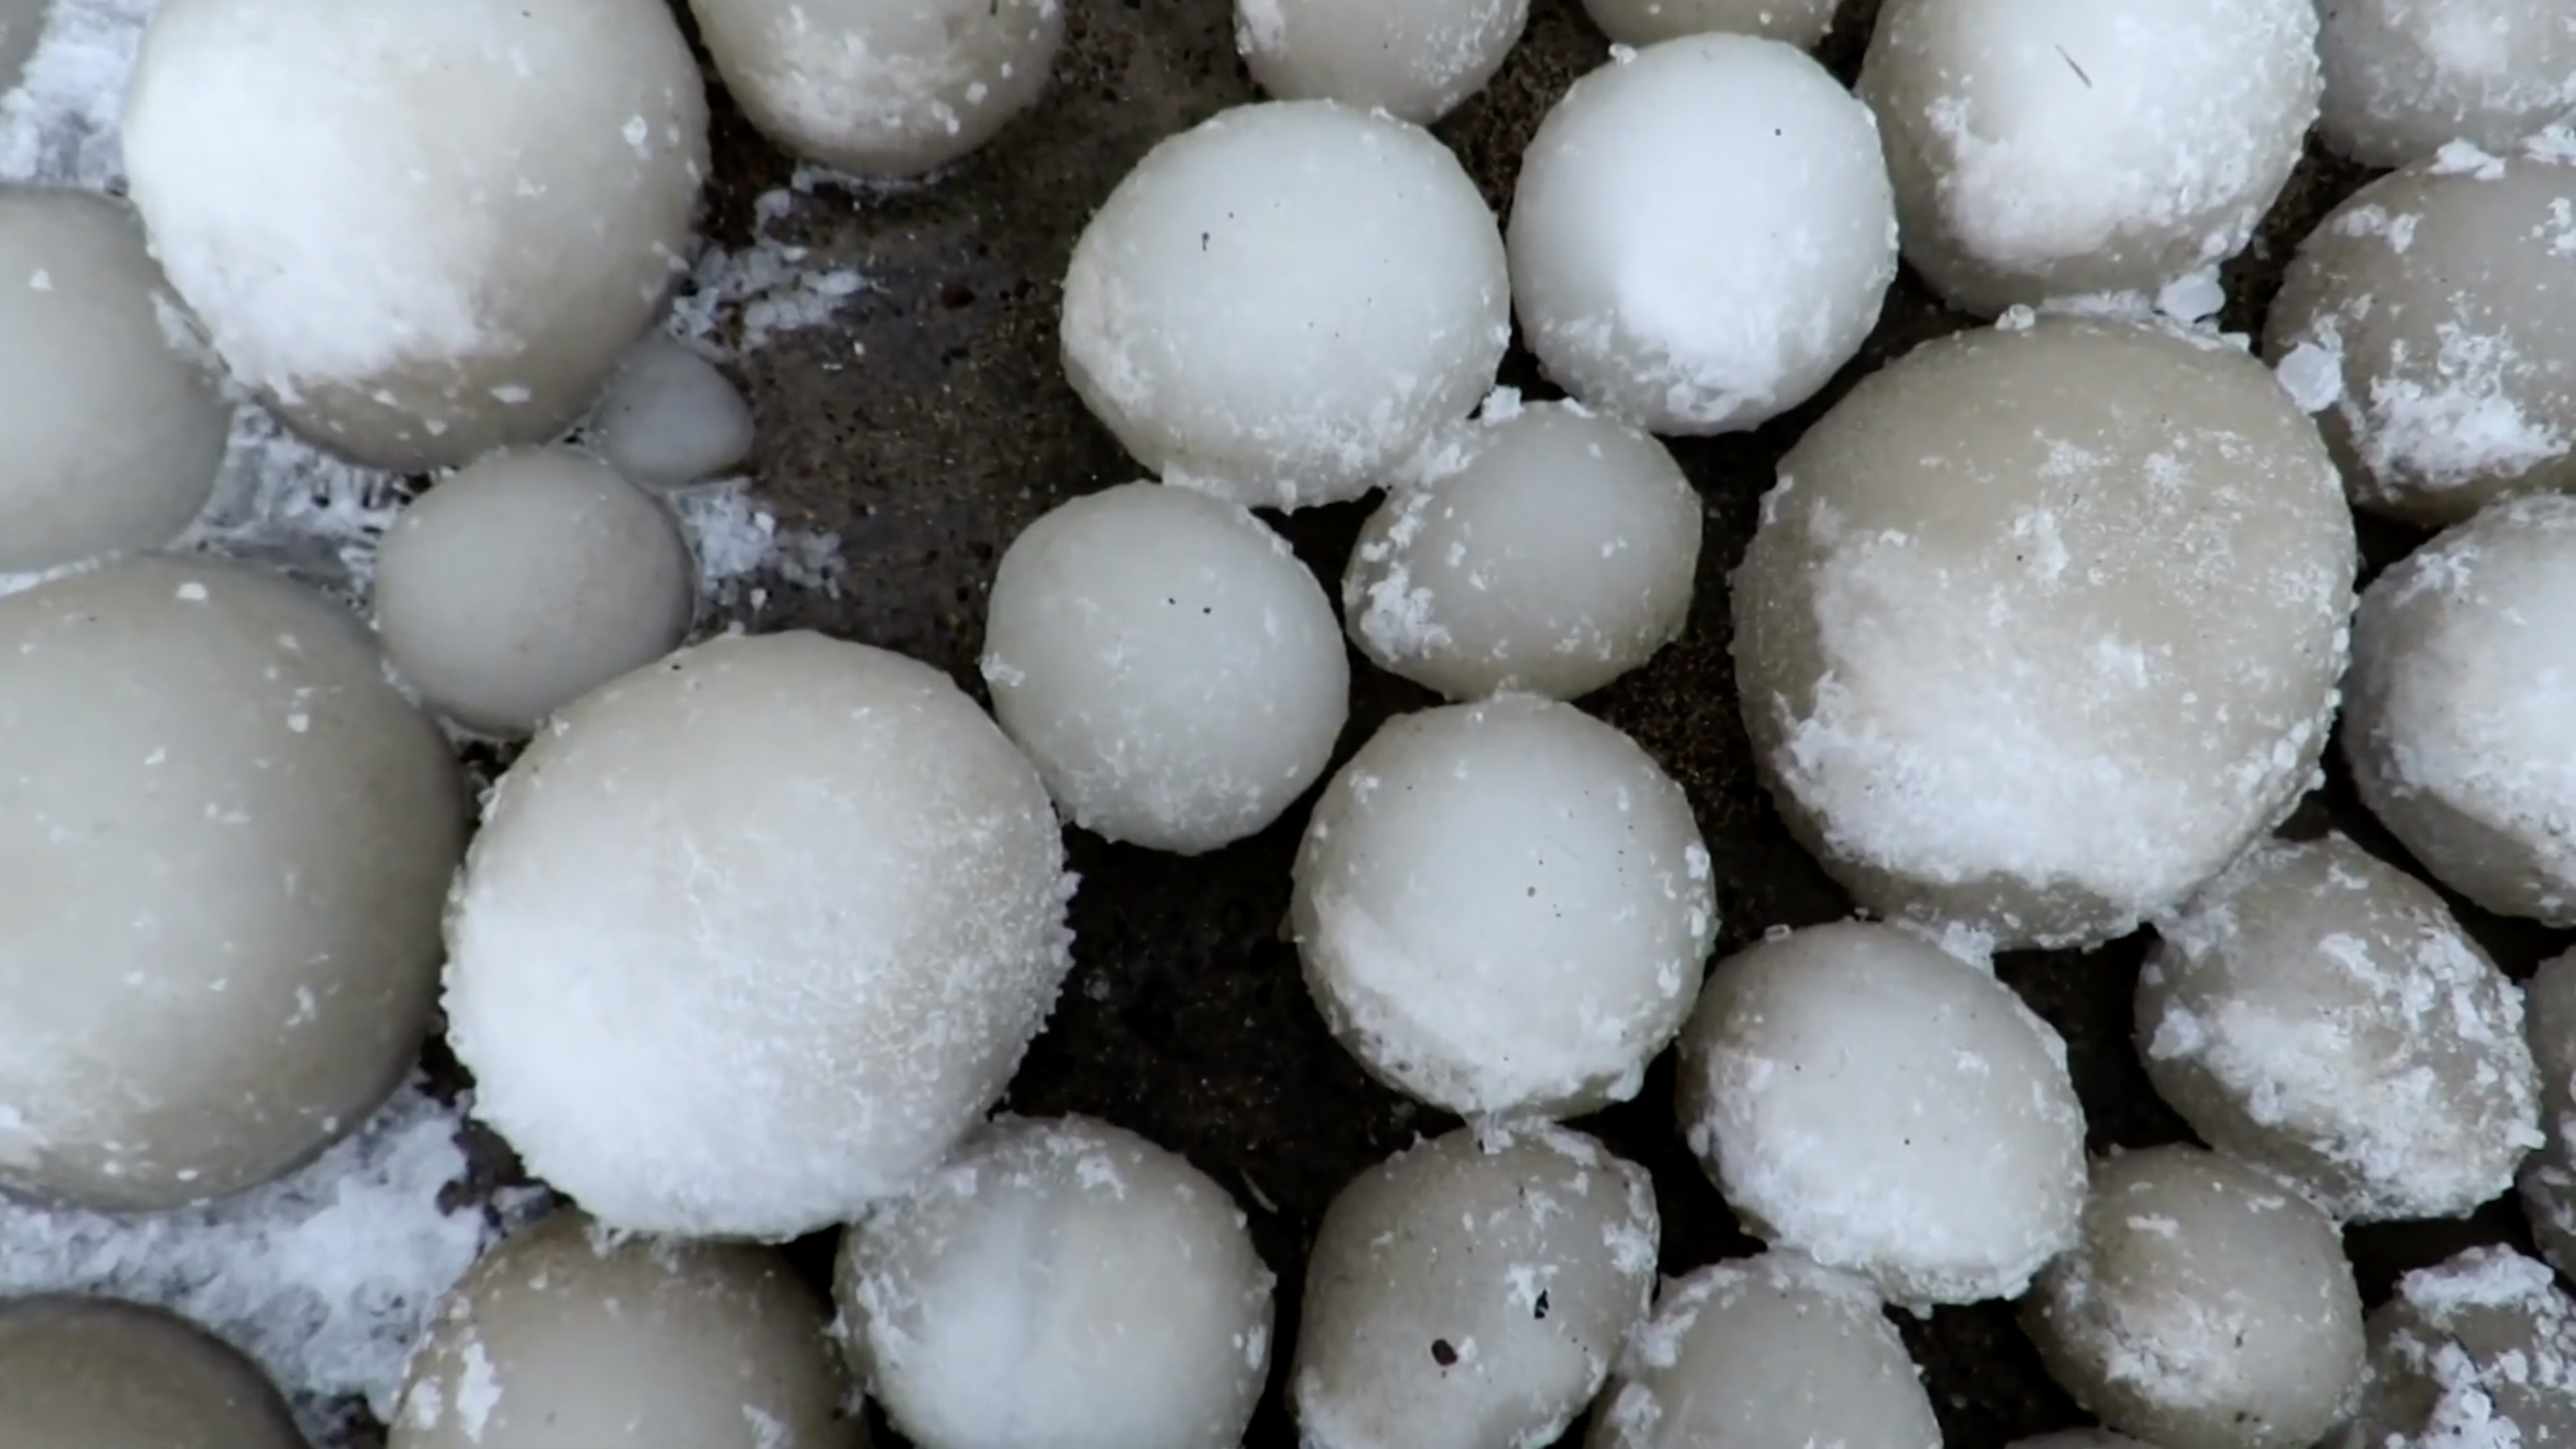 Thousands of rare 'ice eggs' have appeared on a beach in